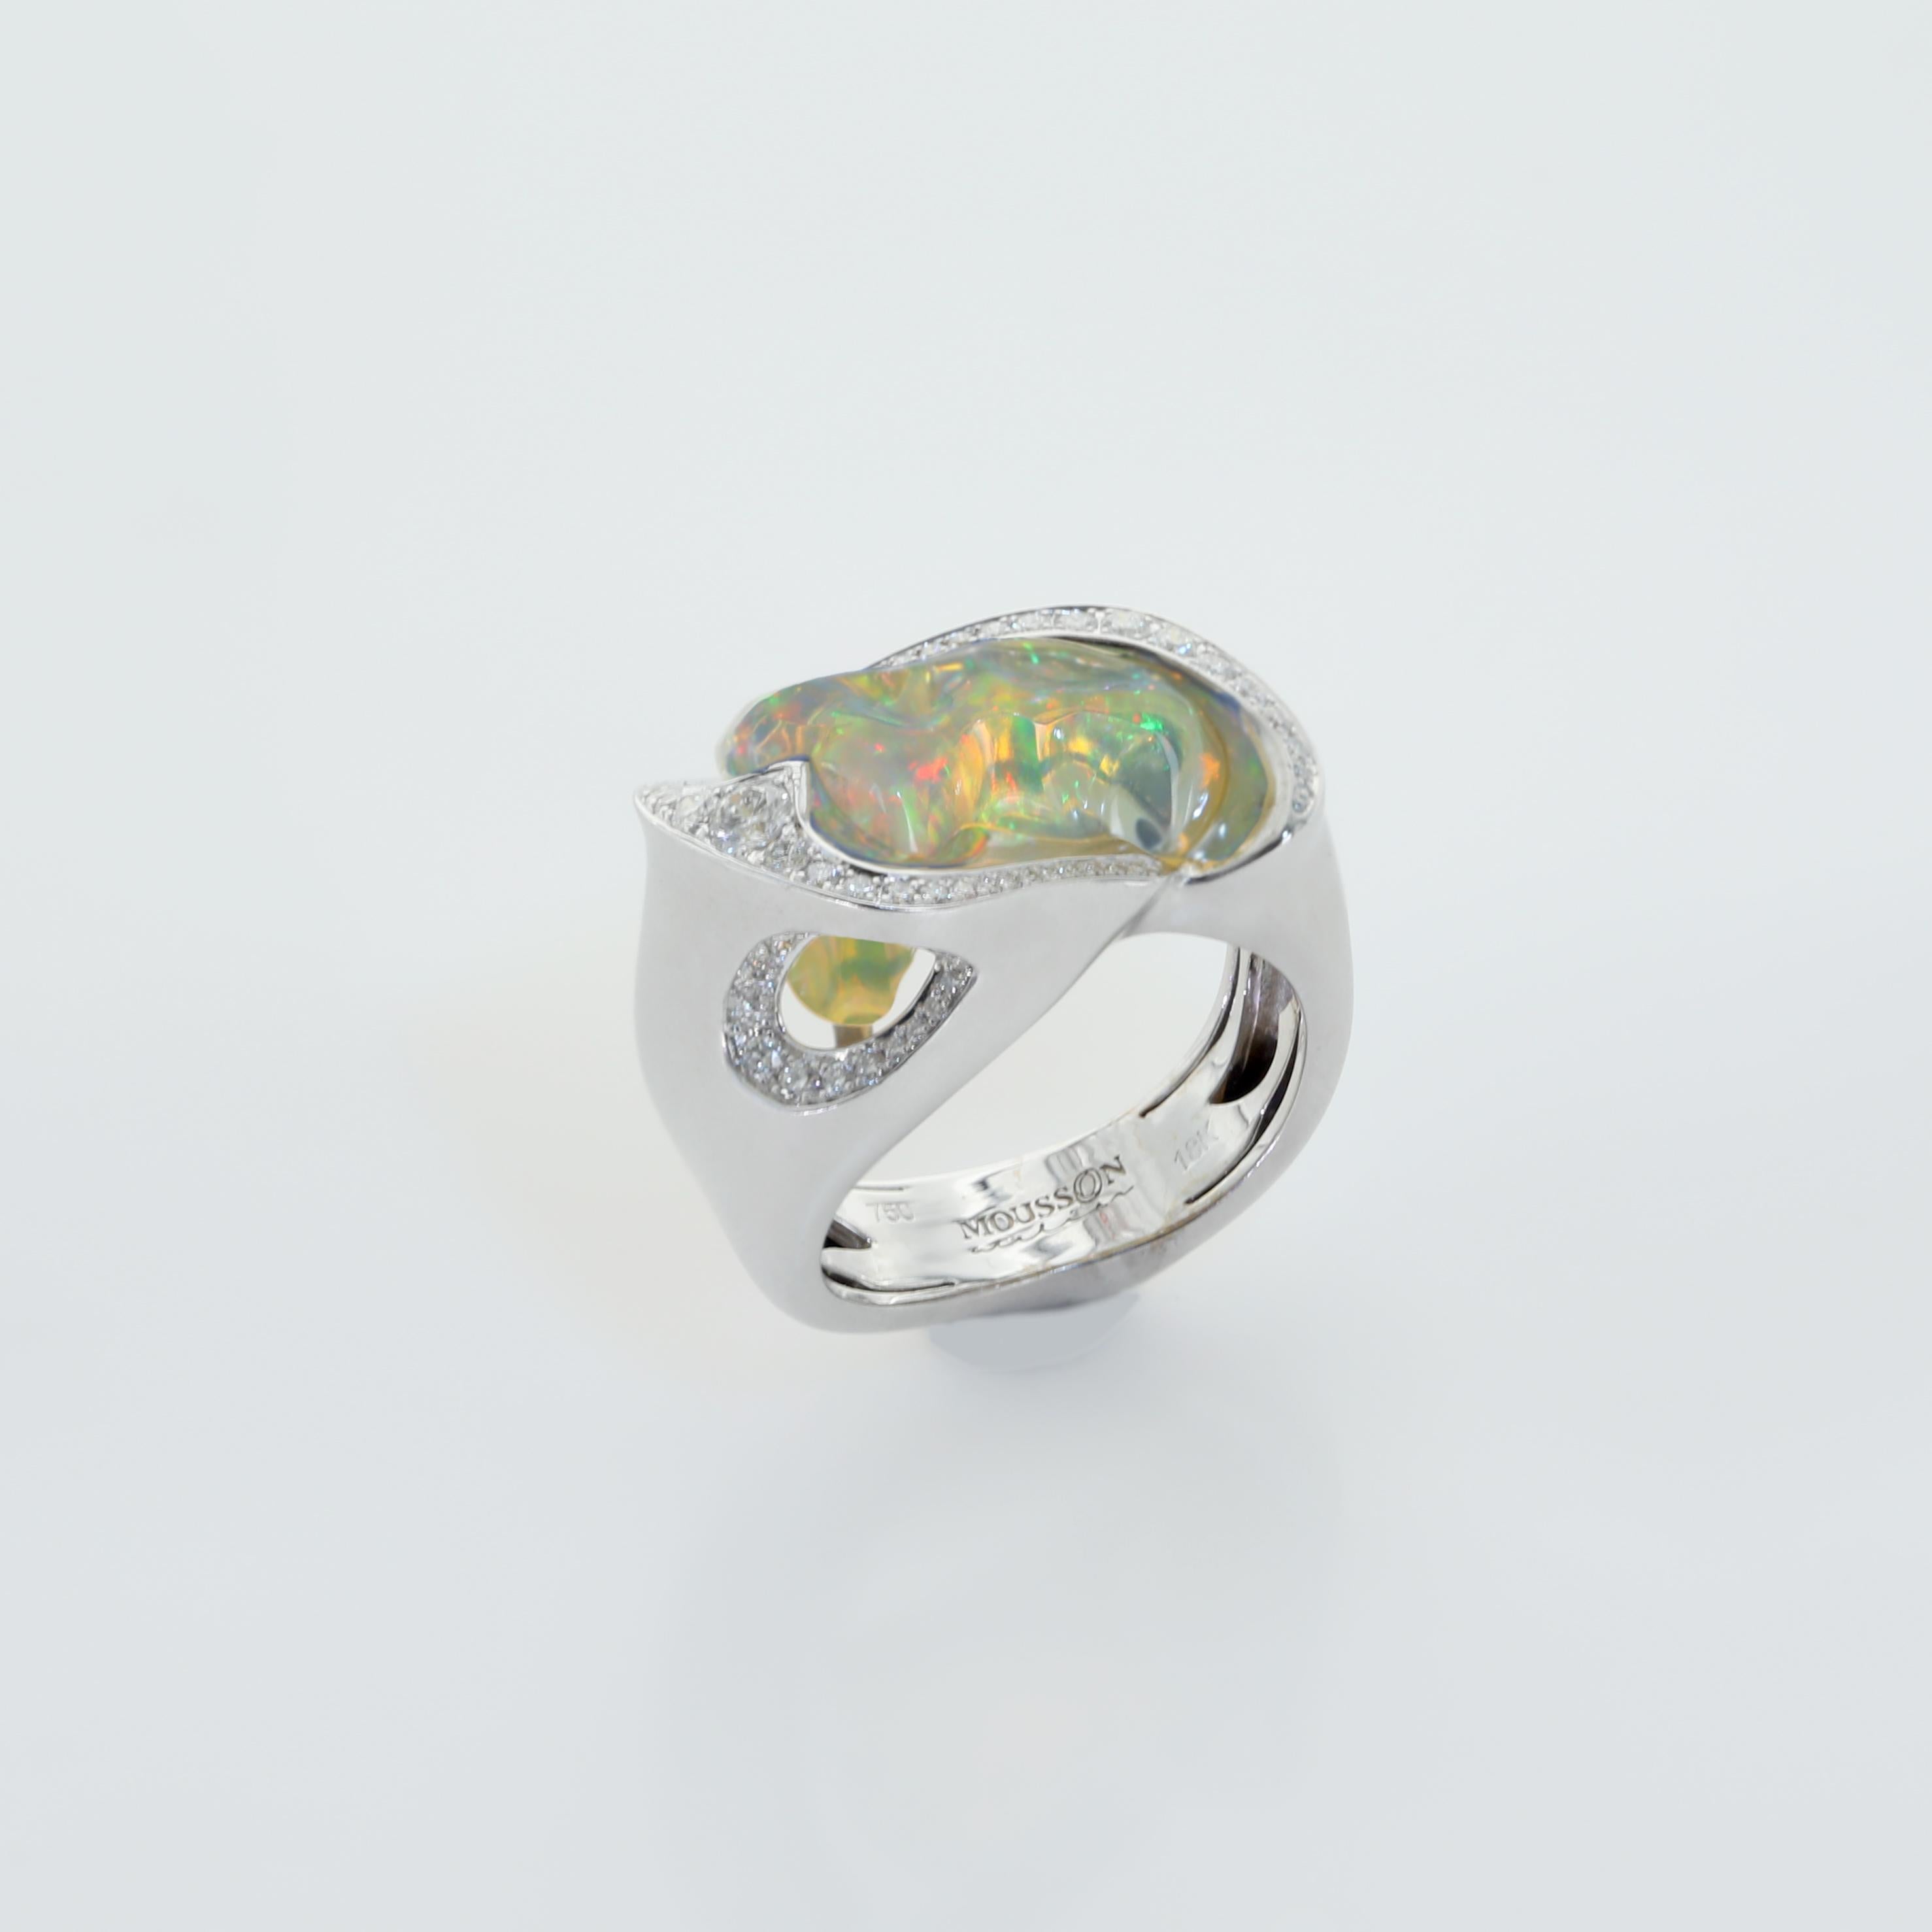 Free Shape Mexican Opal makes this ring One of a kind. Diamonds are supported the play of colors. 18 Karat White Gold Ring
Accompanied with earrings LU116414707821 

US Size 7 3/4
EU Size 55 7/8

23x14.5x32.6 mm
10.93 gm